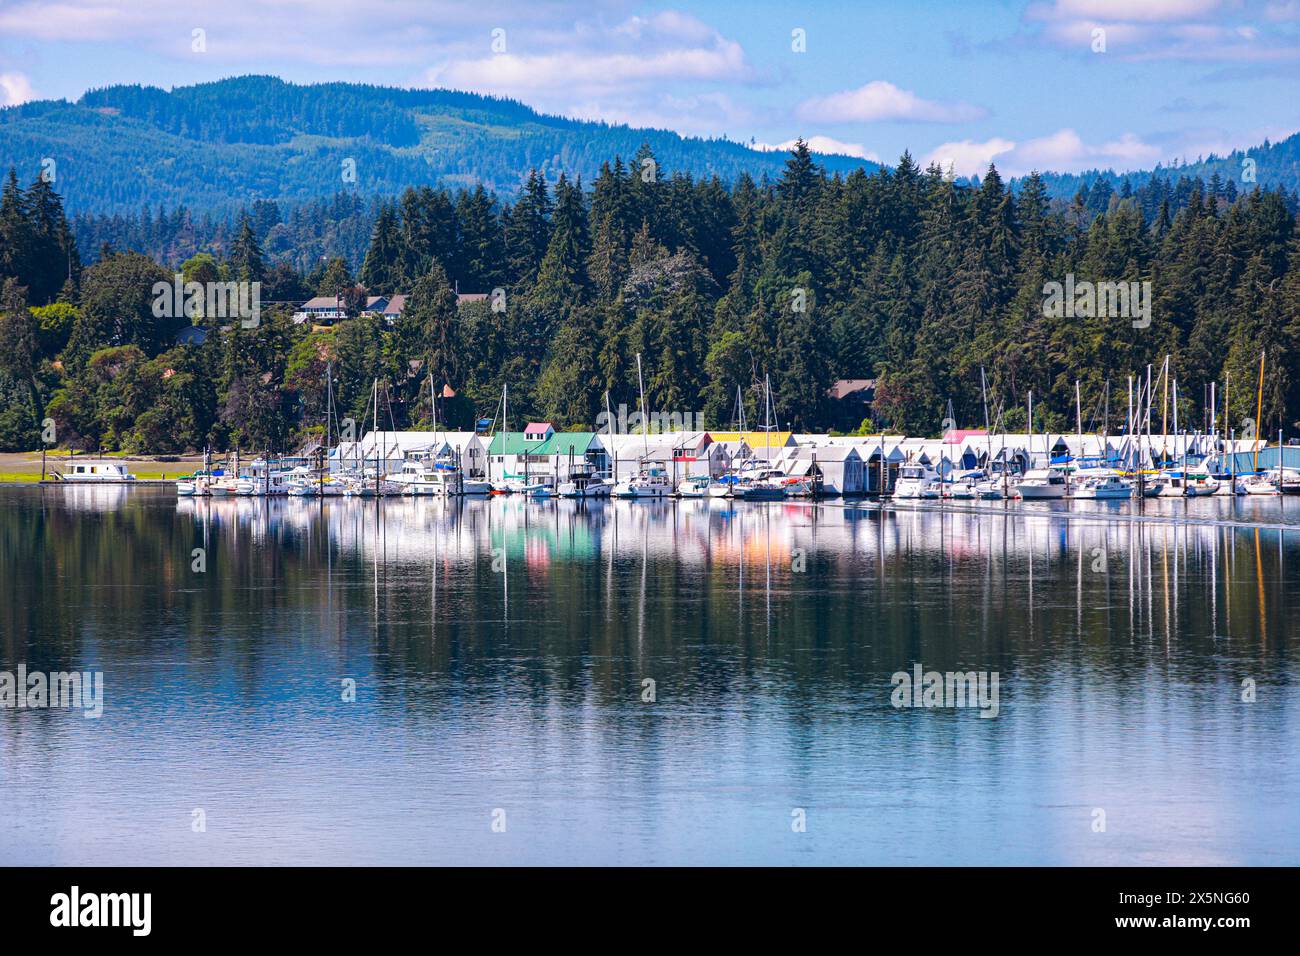 Bremerton, Washington State, USA. Scenic boat marina on the Puget Sound with evergreen trees. Stock Photo